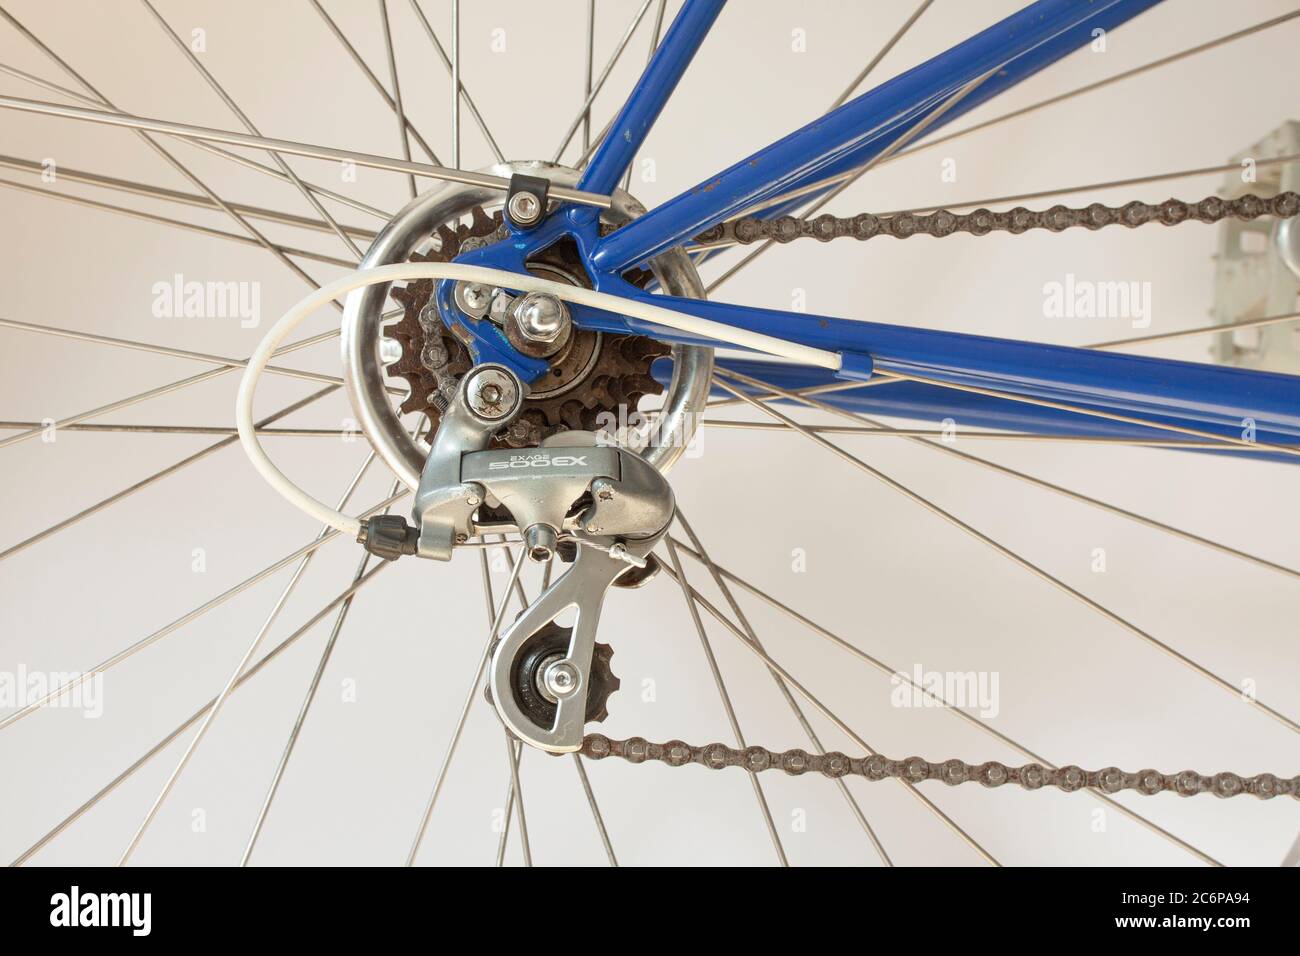 Shimano Exage 500 EX Rear Derailleur, spokes and chain on a sporty bicycle. Close-up image. Stock Photo